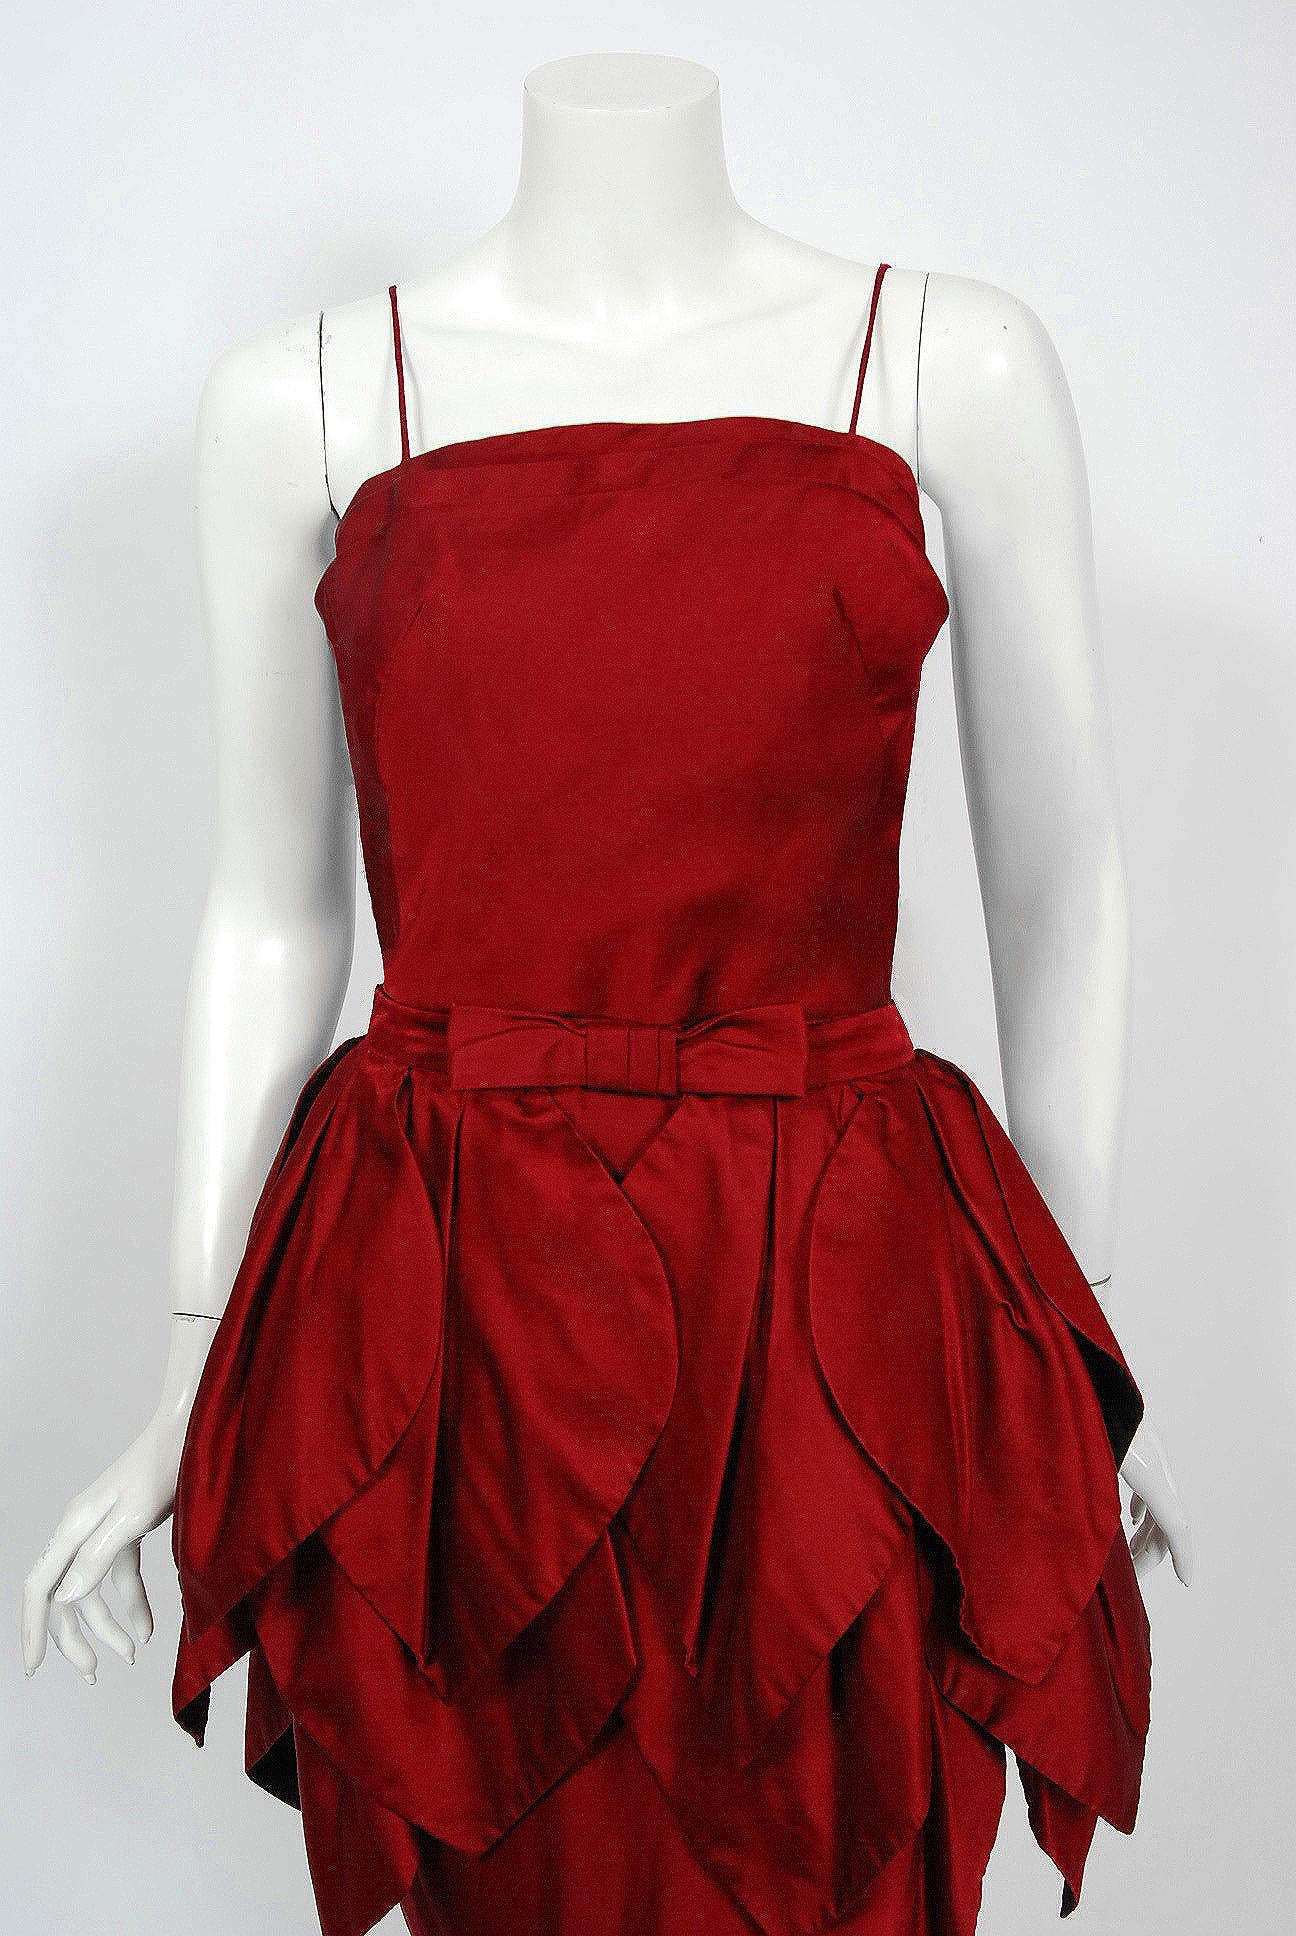 This is such a breathtaking 1950's couture party dress from the iconic Ceil Chapman designer label. Perfect for Valentine's Day; you can't help but feel sensational in this beauty. The garment is fashioned from stunning mid-weight silk in the